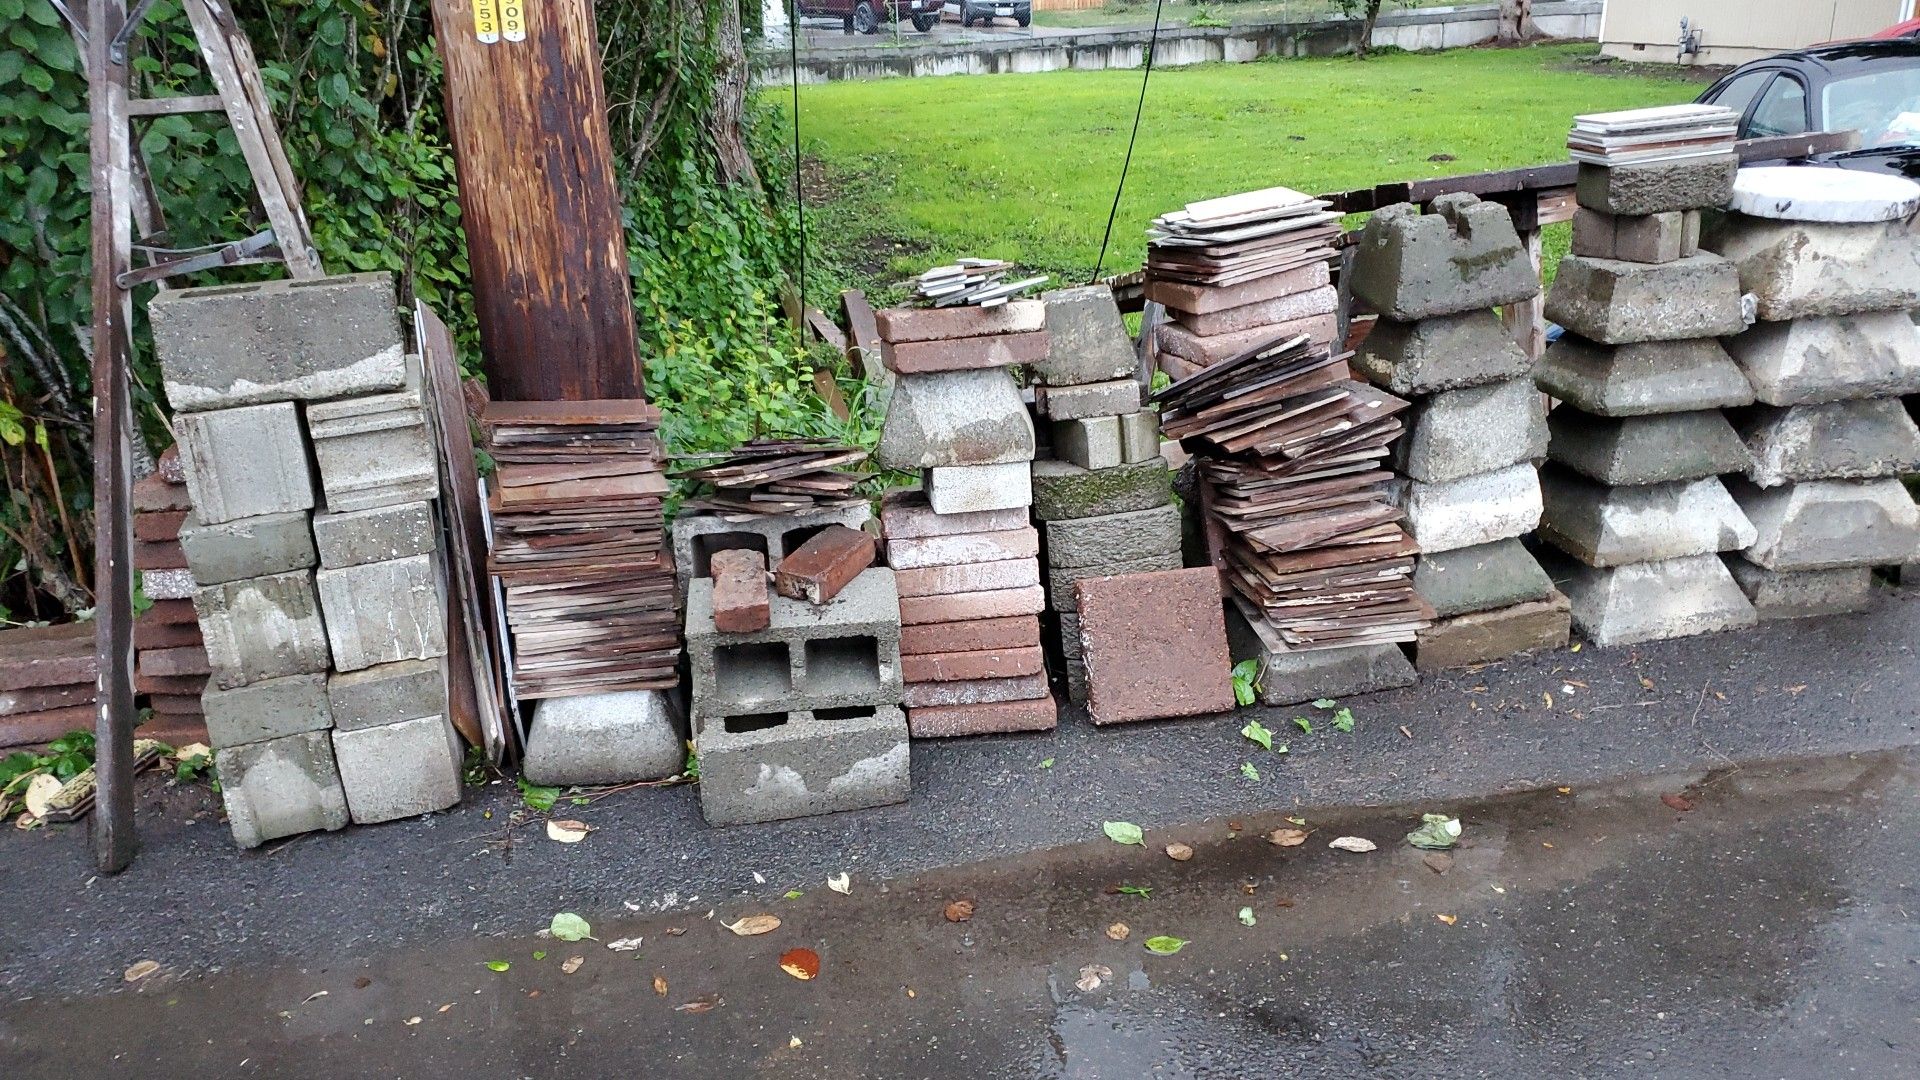 Free tiles and pavers and cinder blocks ect.